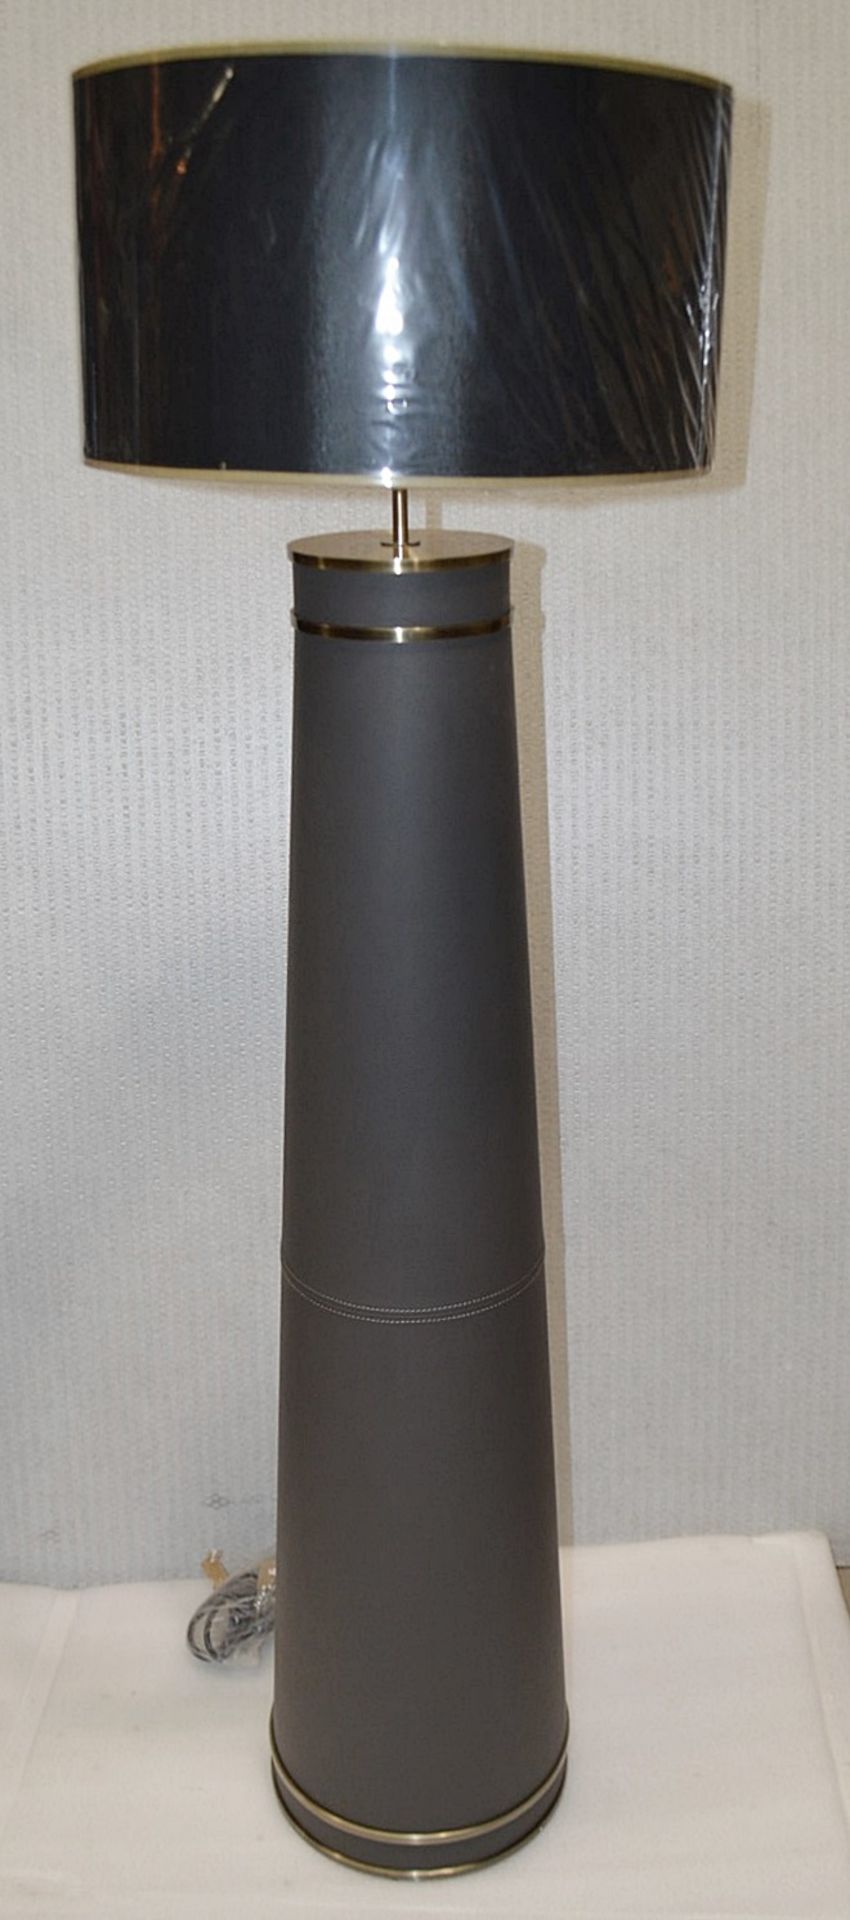 1 x Luxurious CHELSOM Grey Leather Covered Floor Lamp With Brass Accents - Includes A Black & Gold